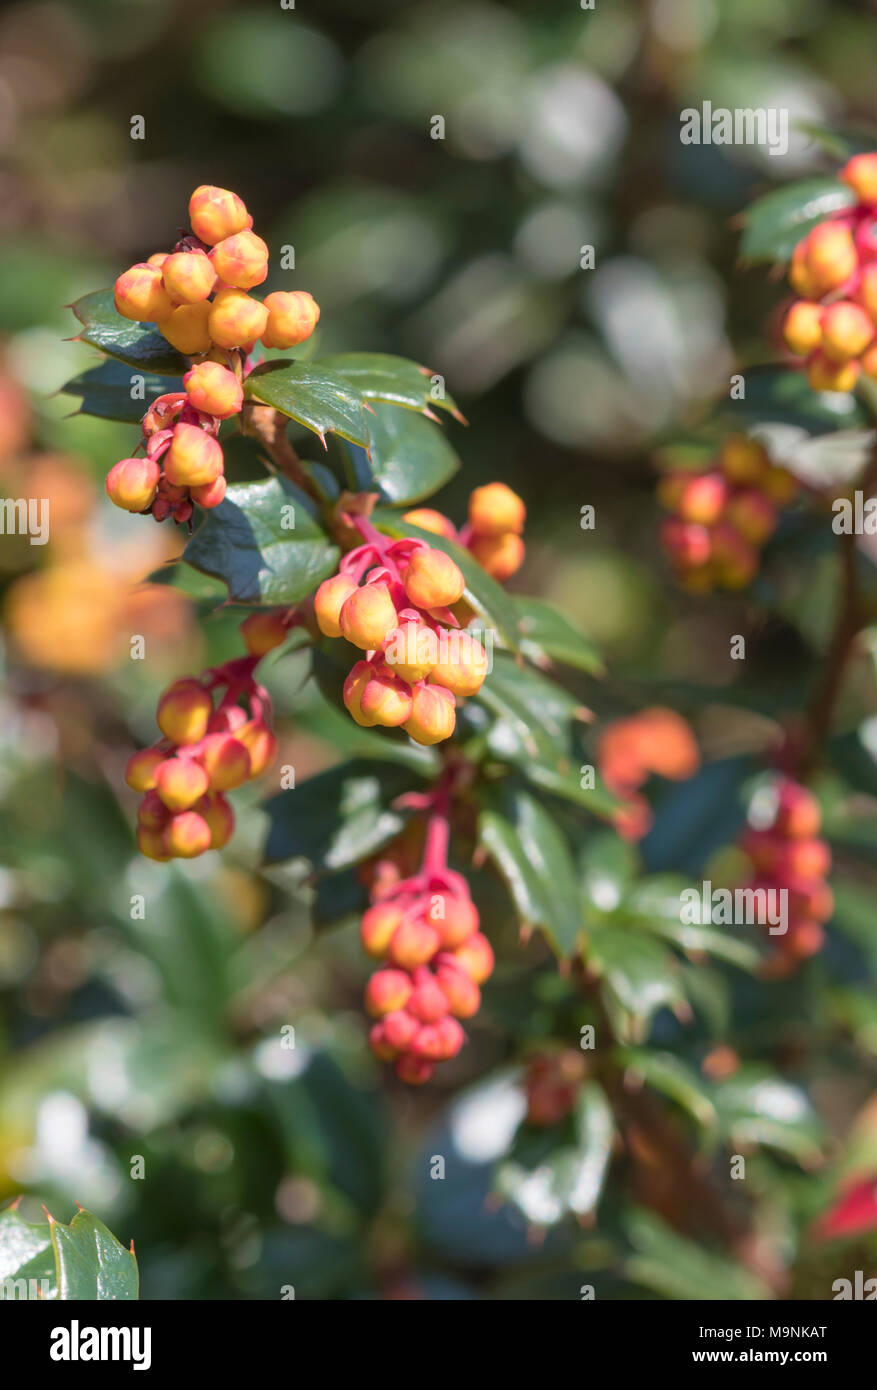 Darwin's Barberry bush (Berberis darwinii plant) showing leaves and orange red berries growing in Spring in West Sussex, England, UK. Closeup portrait. Stock Photo